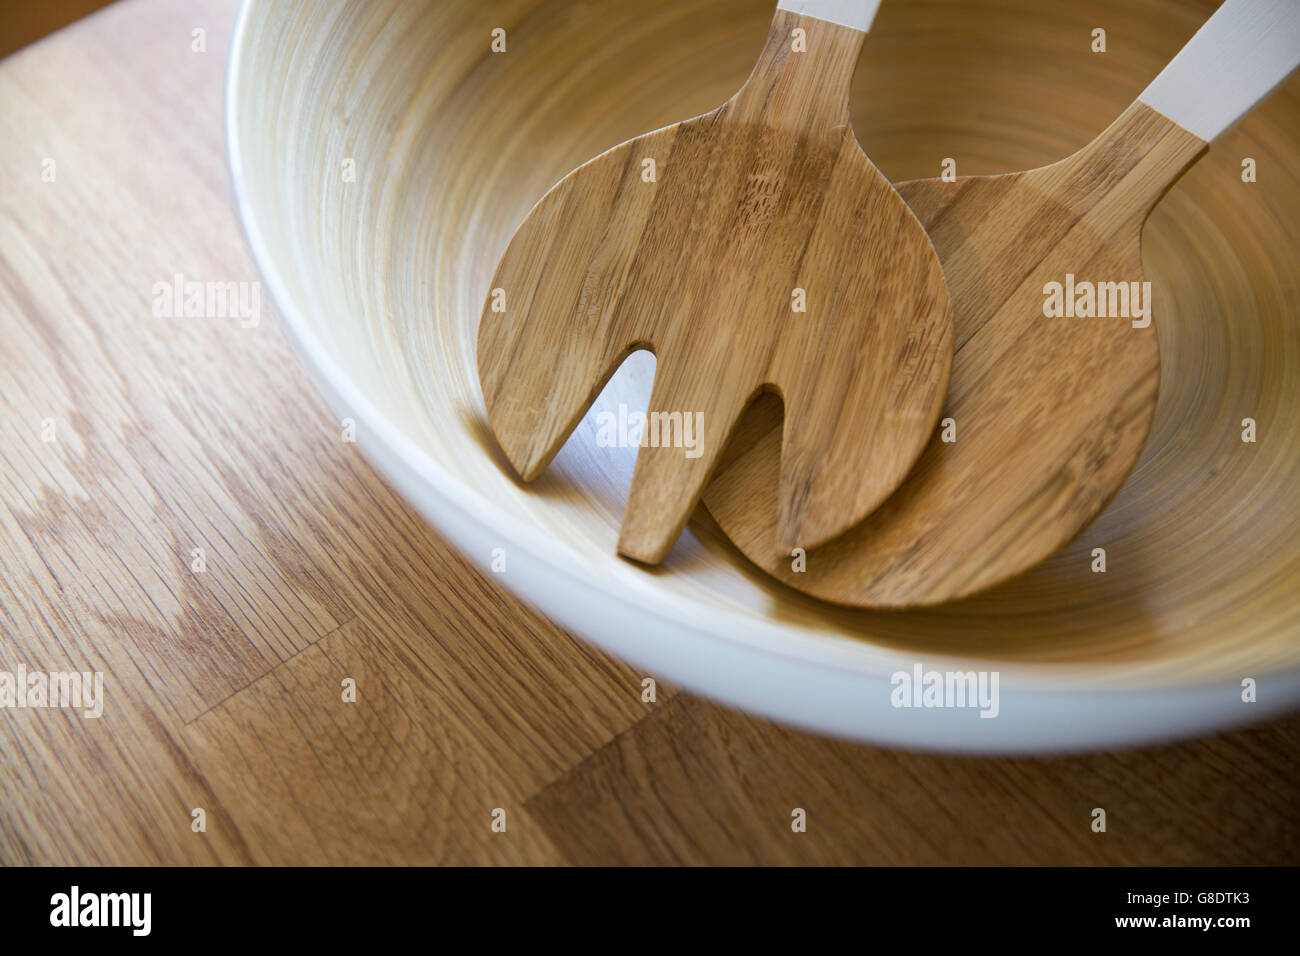 wooden salad servers in white bowl Stock Photo